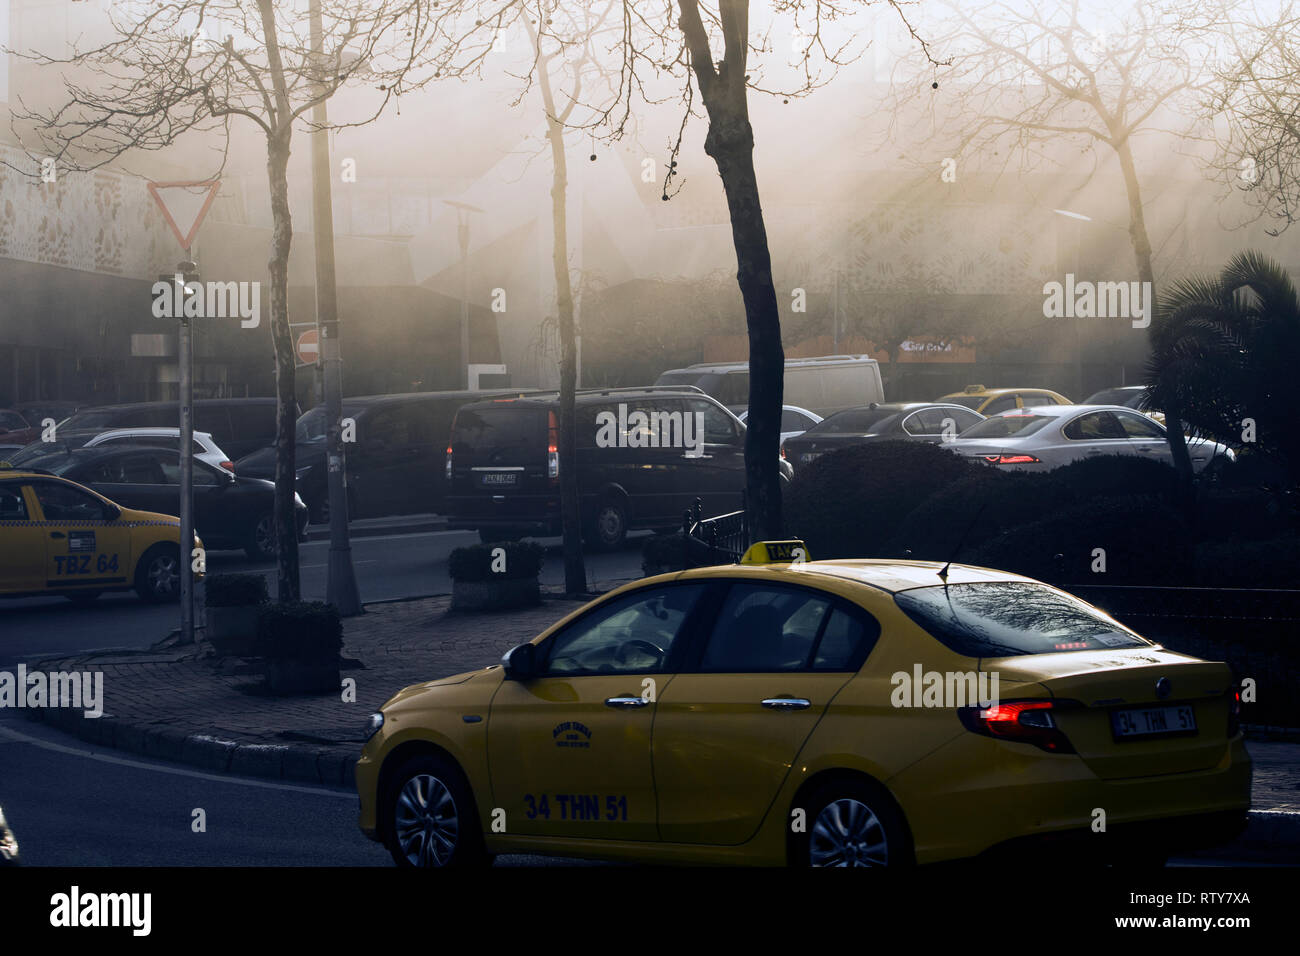 Taksim, Istanbul / Turkey - February 20th, 2019: Air pollution and traffic congestion. Stock Photo